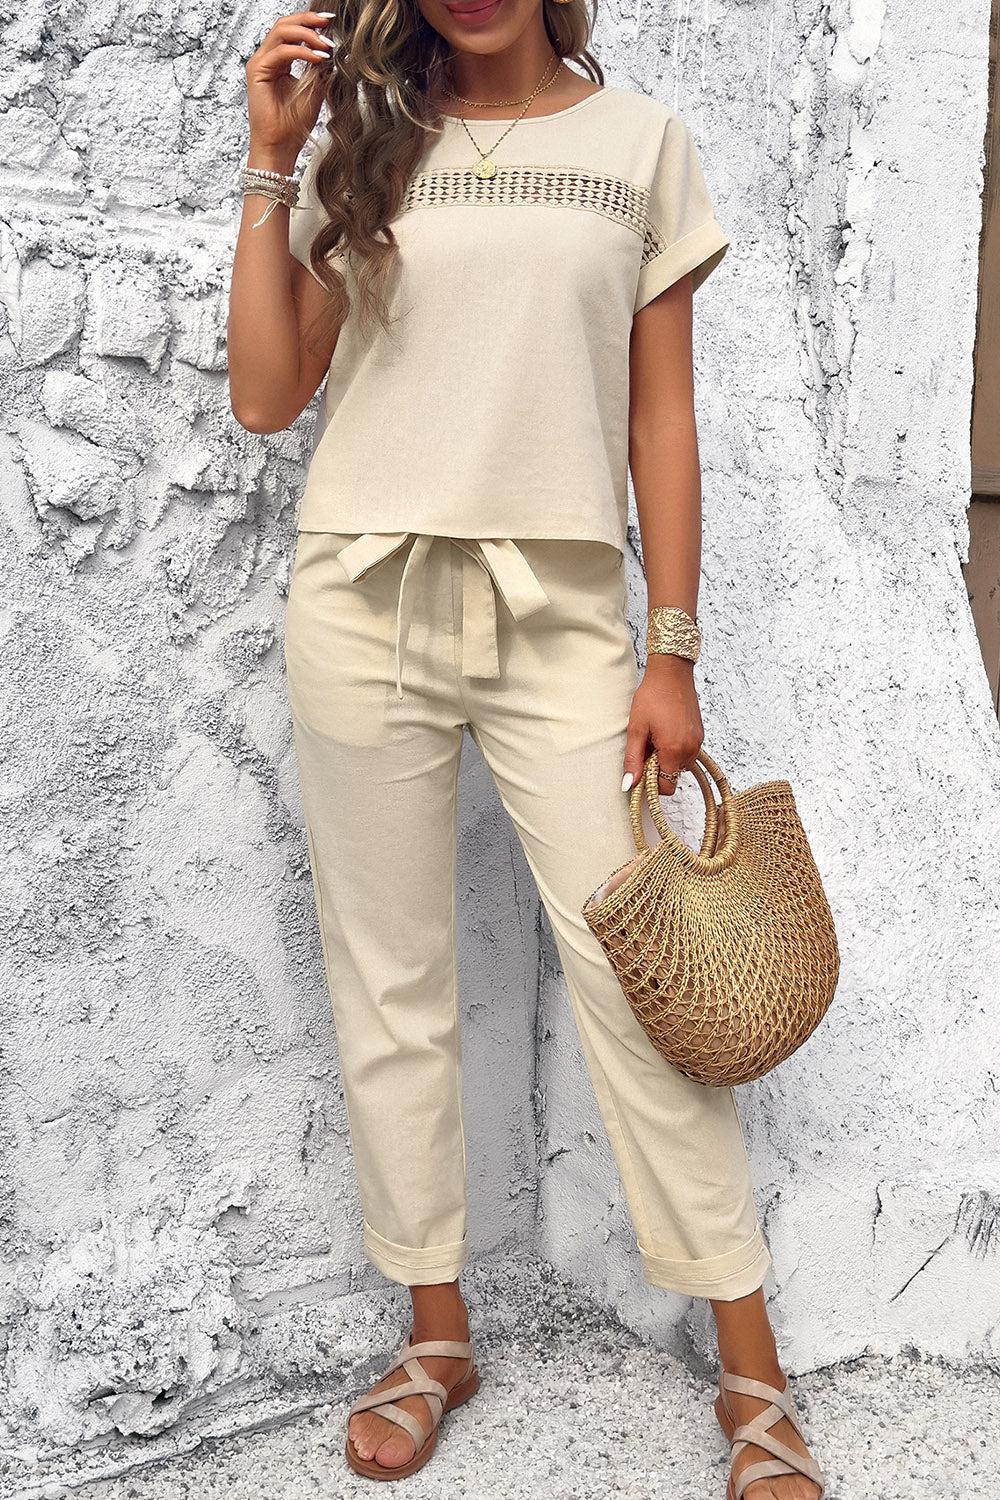 a woman in a white top and beige pants